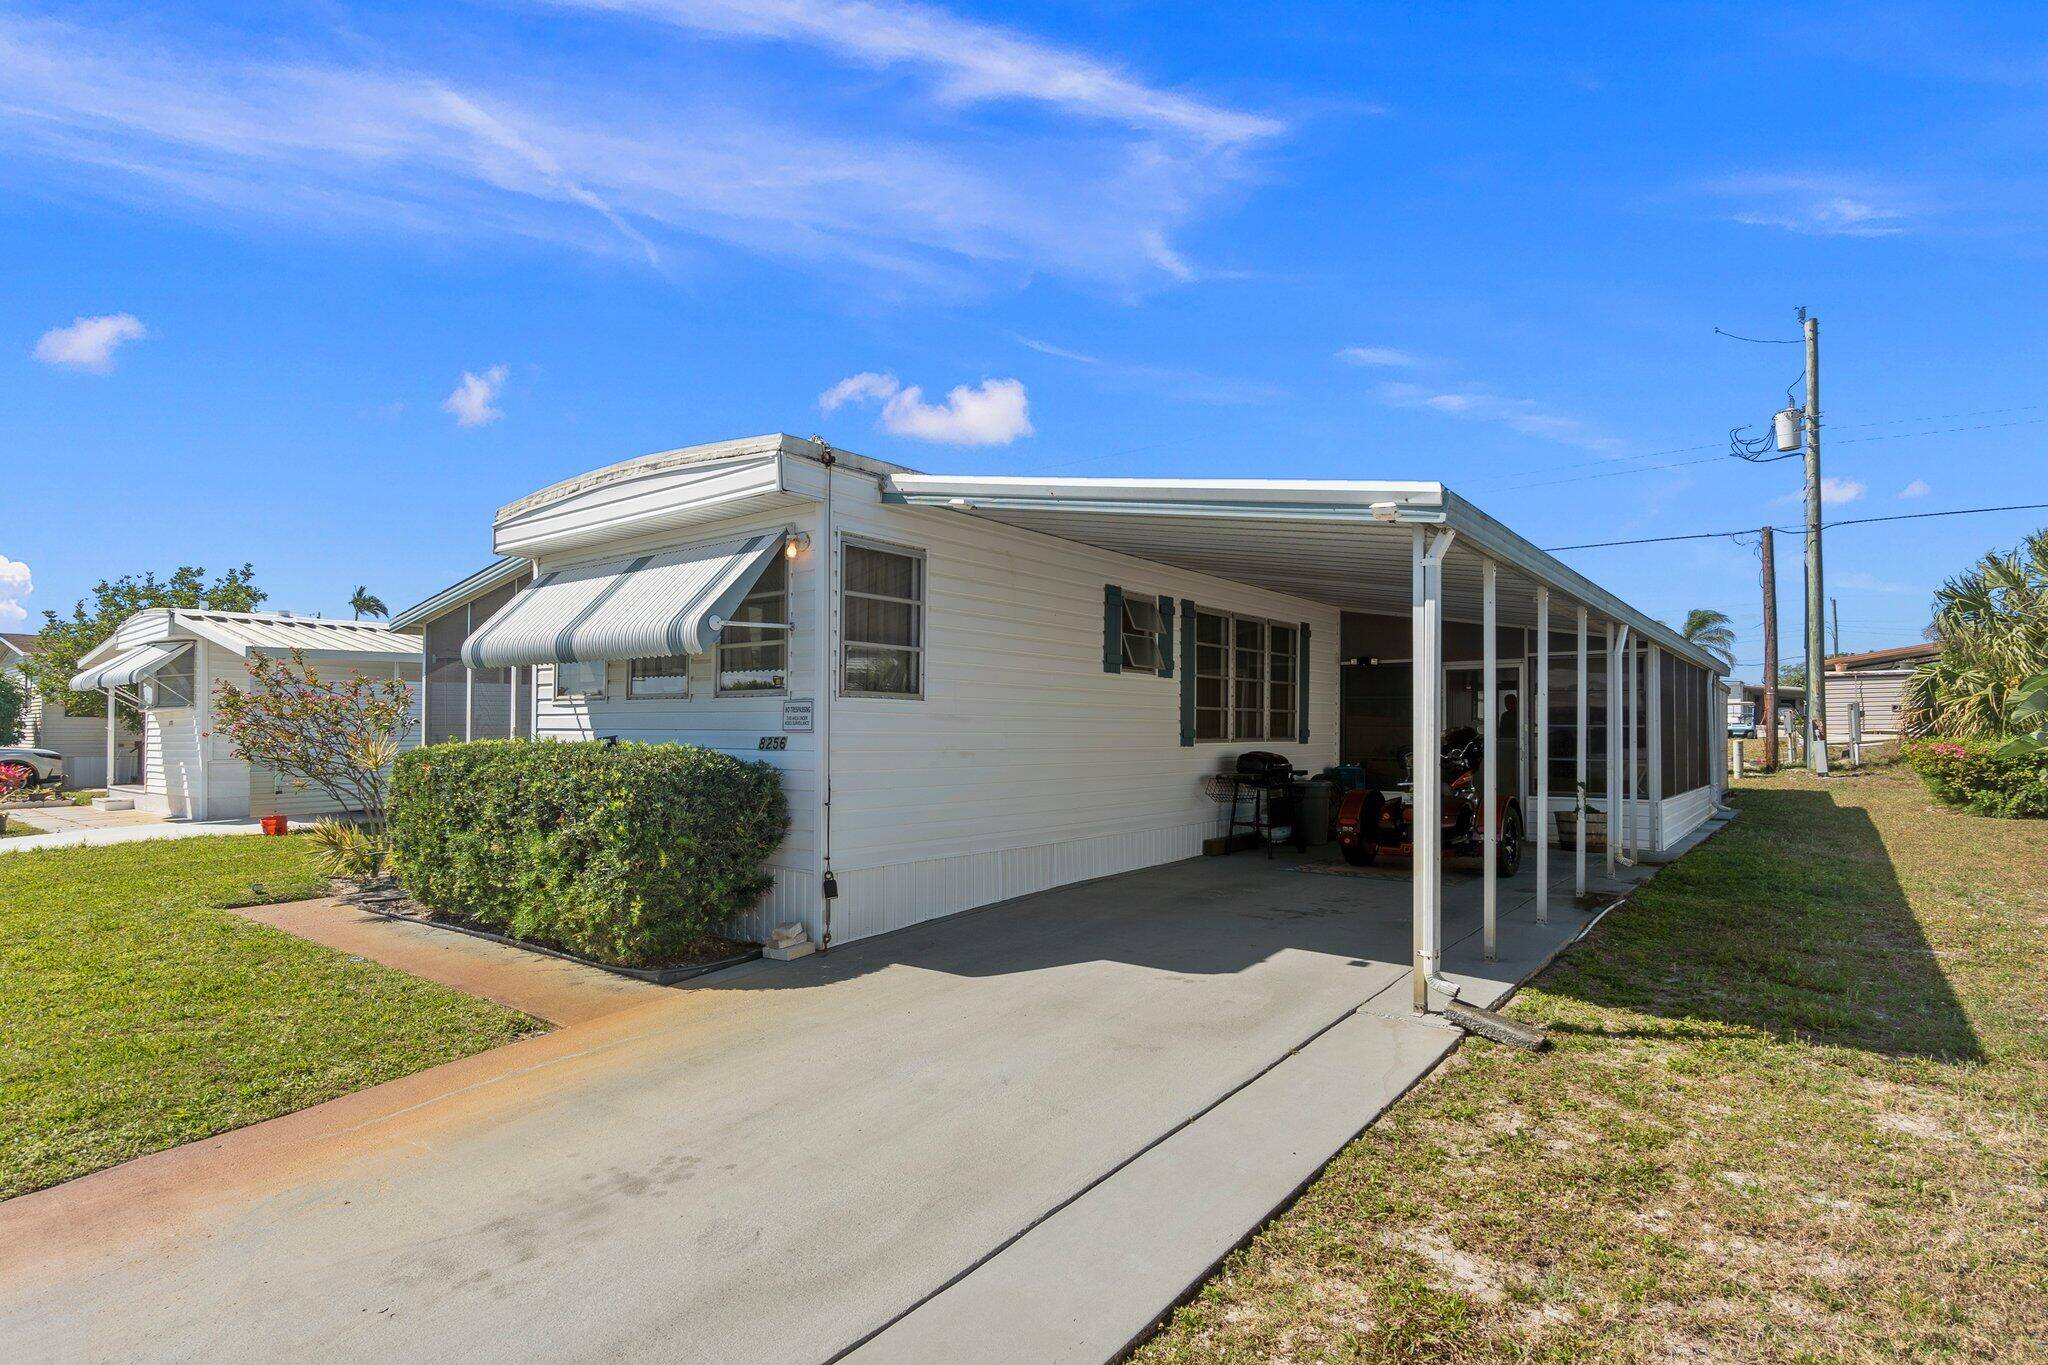 Welcome home to this beautifully maintained mobile home in the community of Ridgeway in Hobesound, FL.